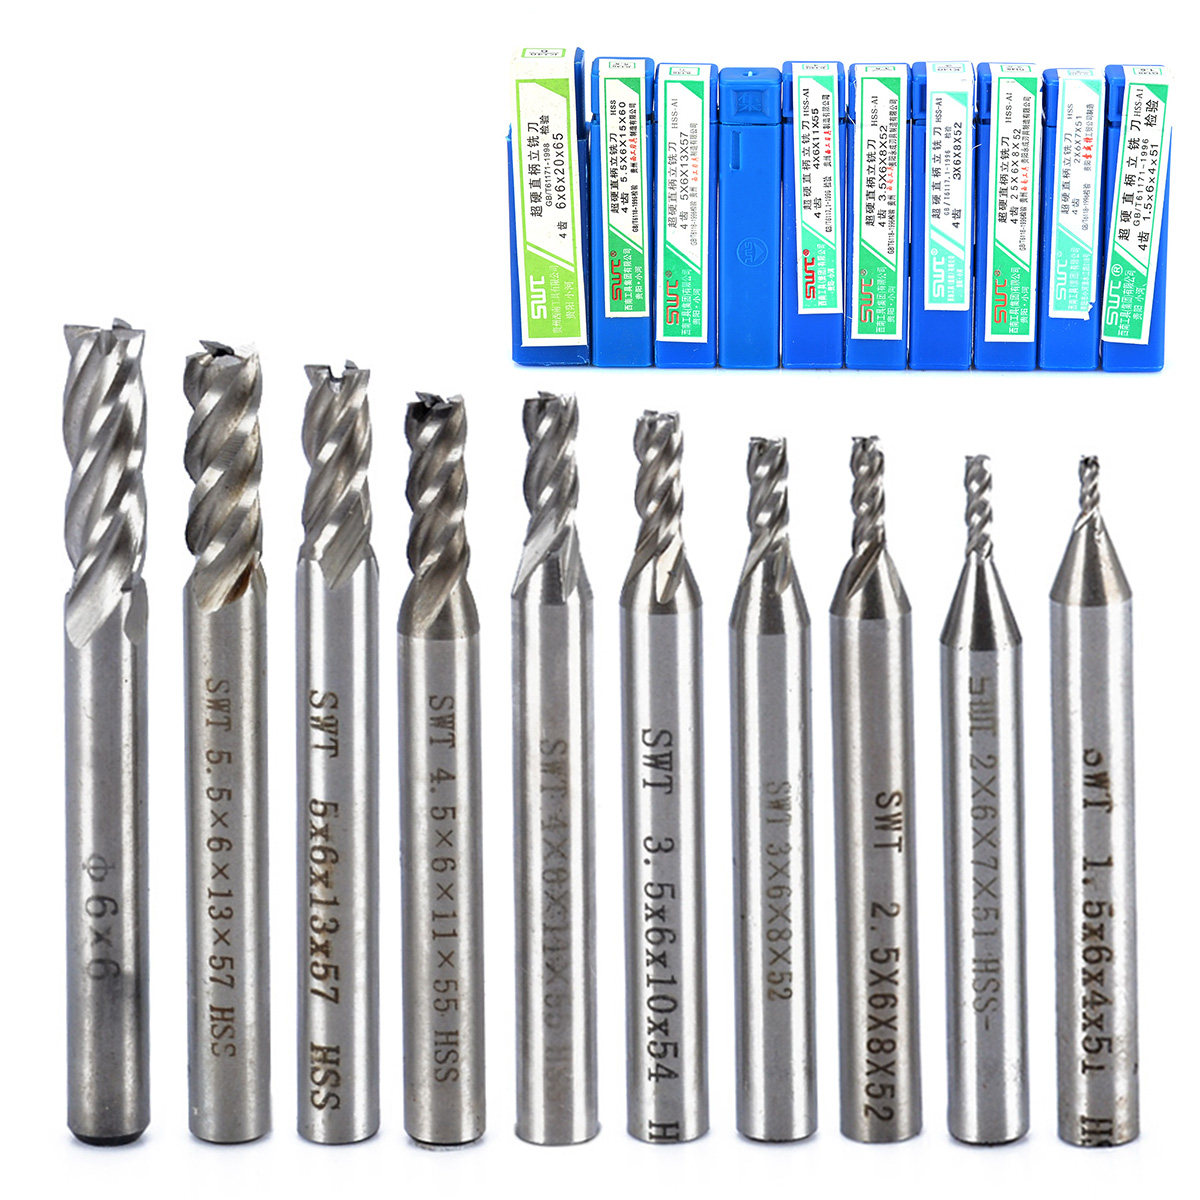 Flute End Mill Cutter Milling Cutters CNC Straight Shank Woodworking Drill Bits 